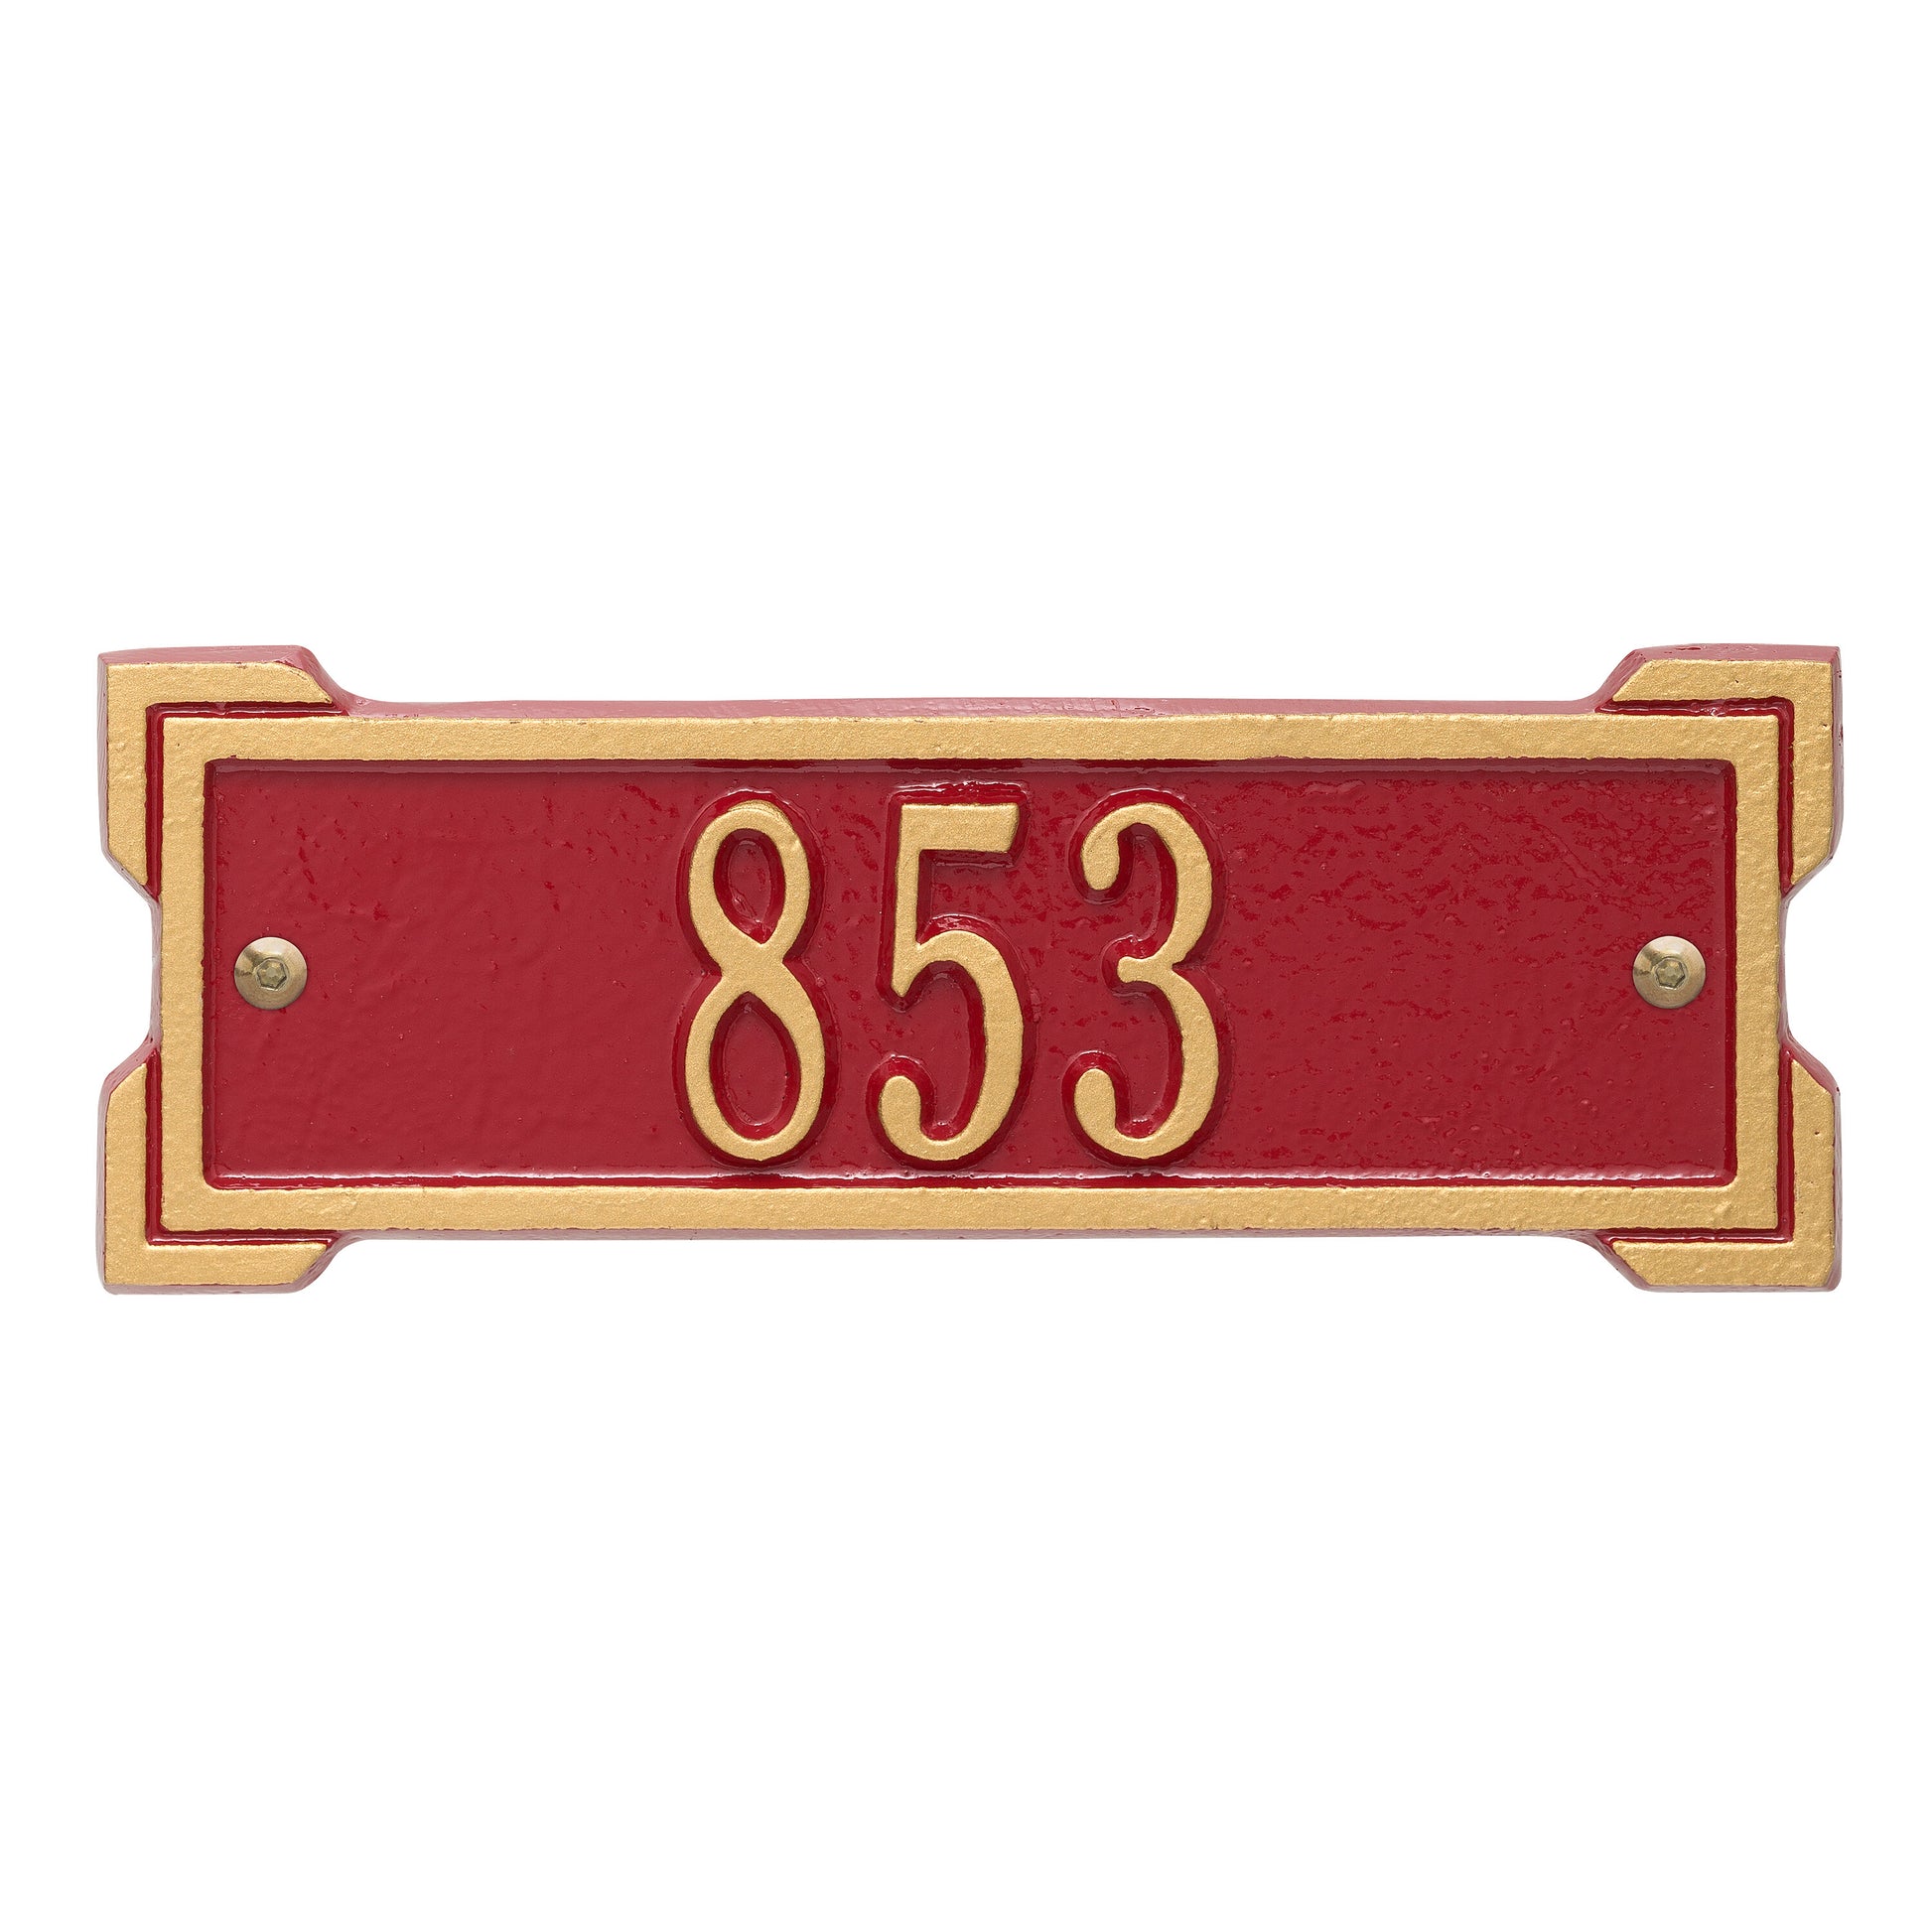 Whitehall Products Personalized Roanoke Petite Wall Plaque One Line White/gold